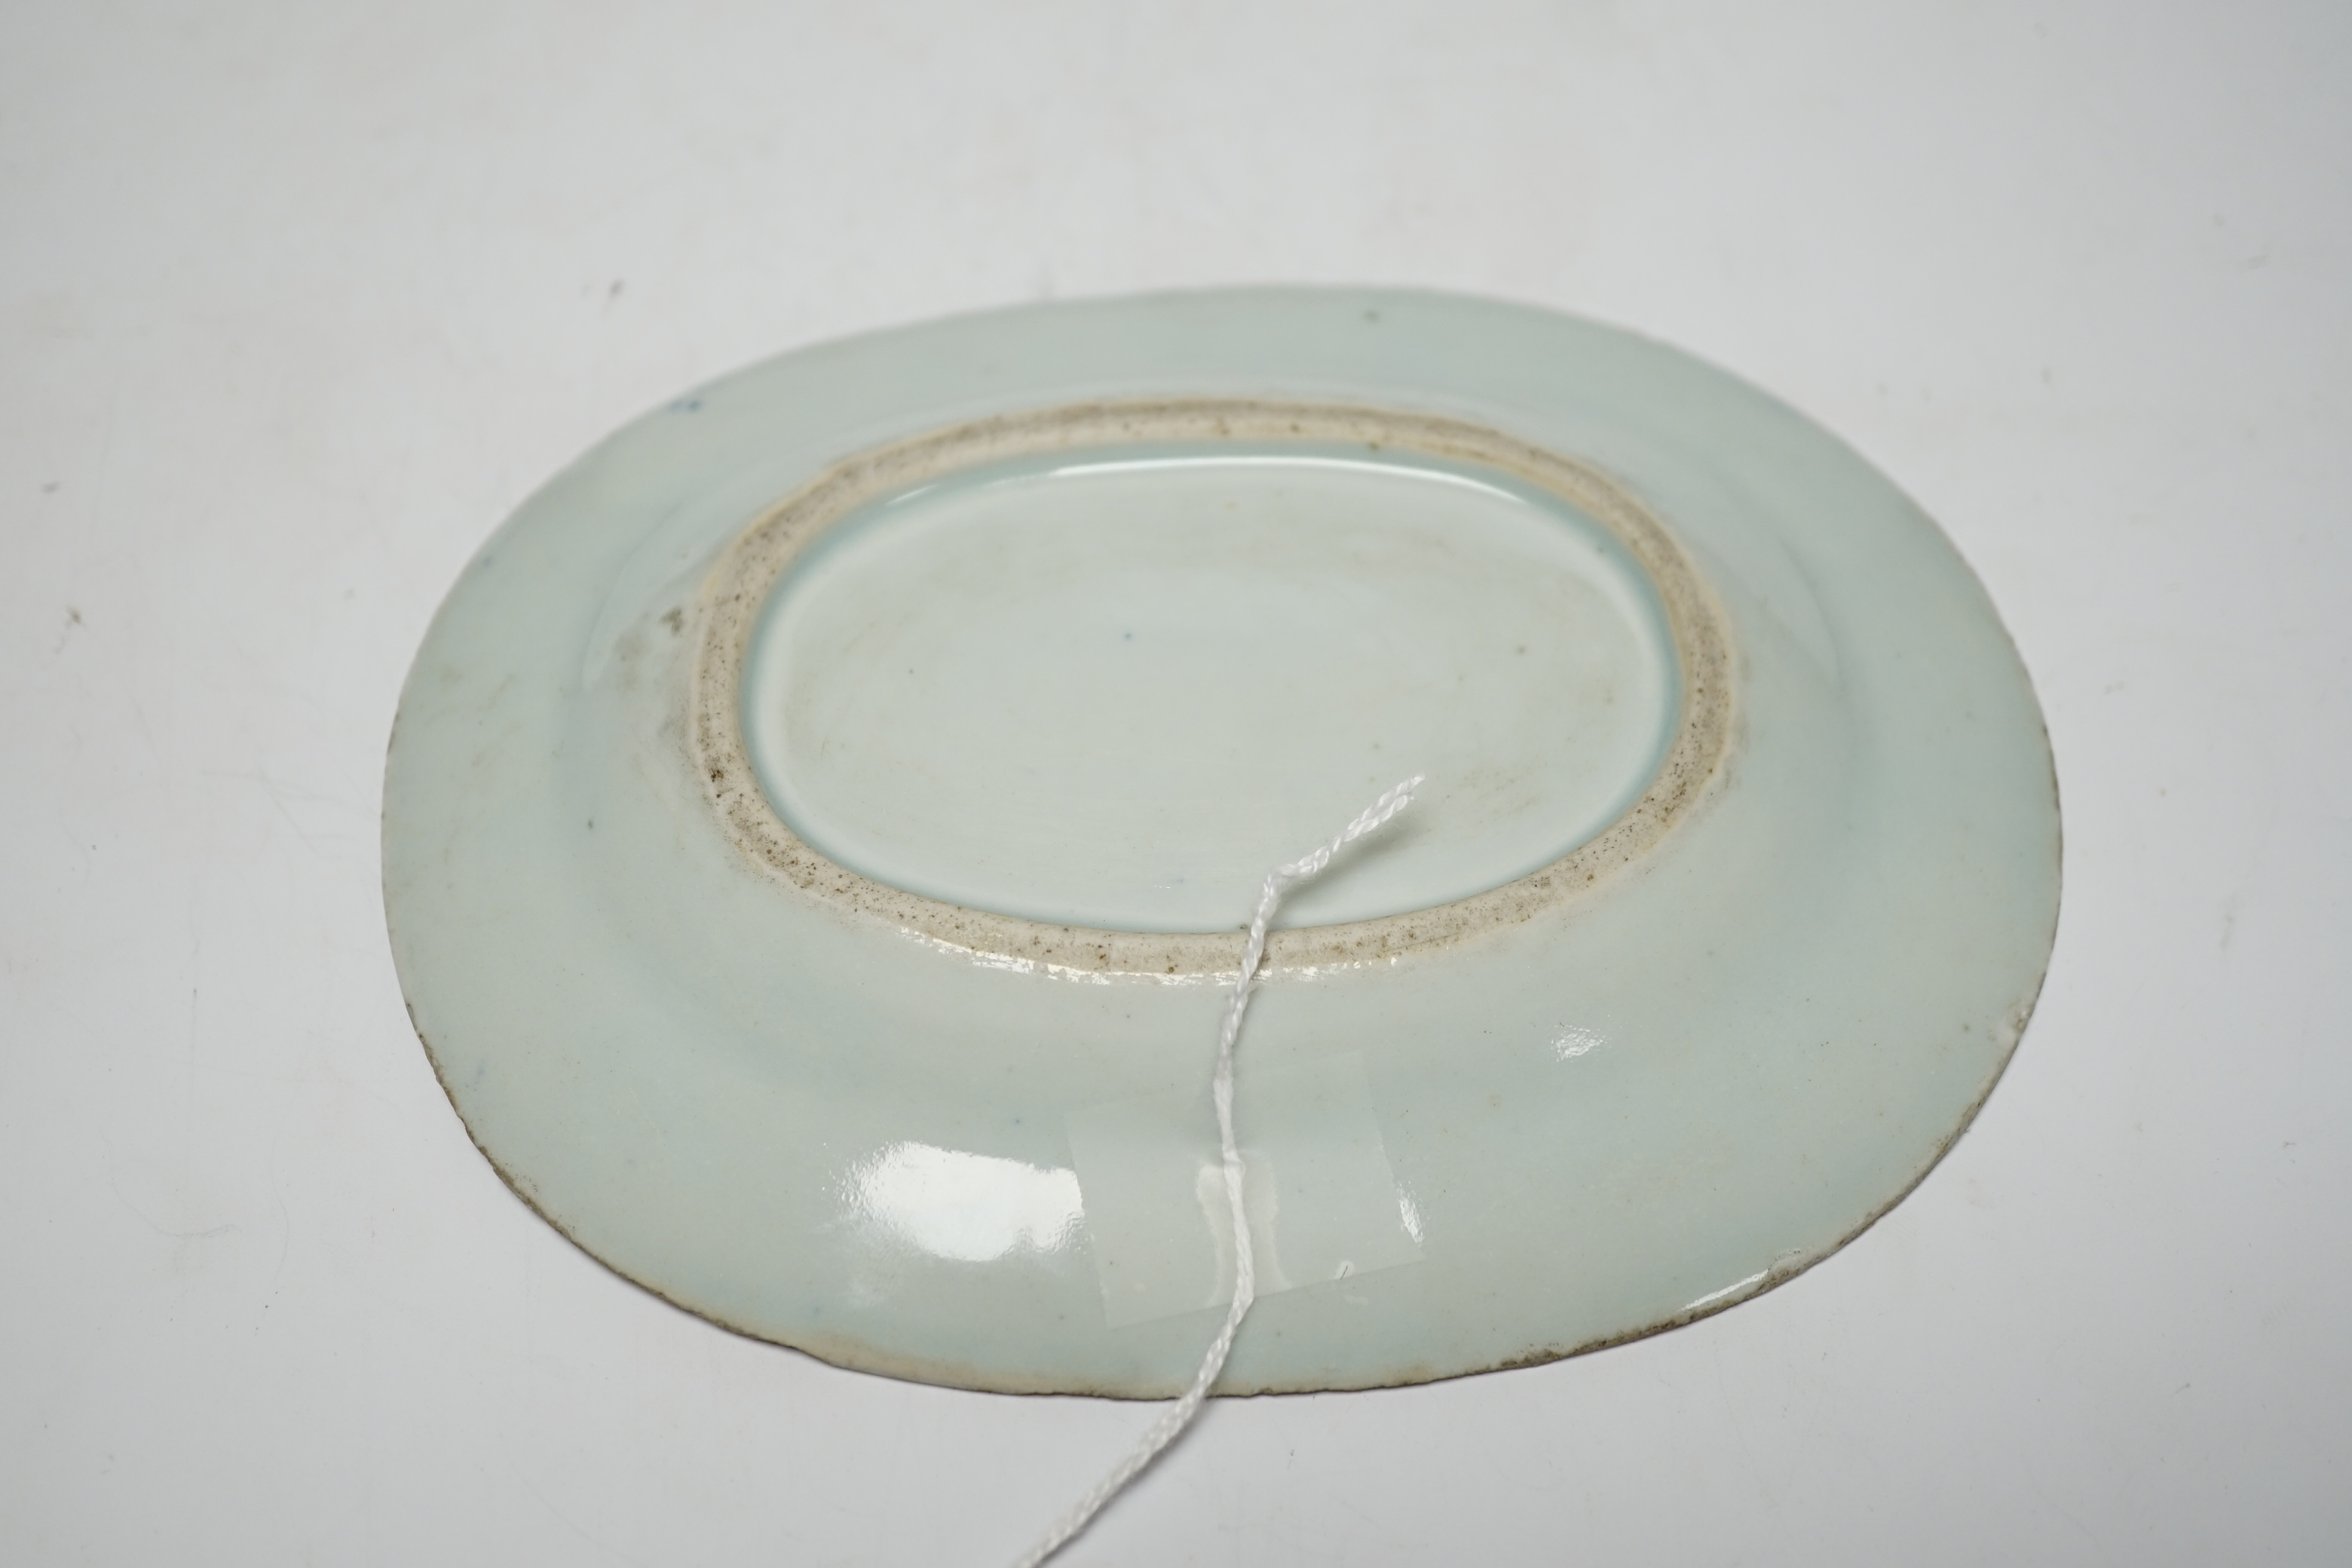 A small Chinese blue and white export dish, late 18th century, 16cm wide